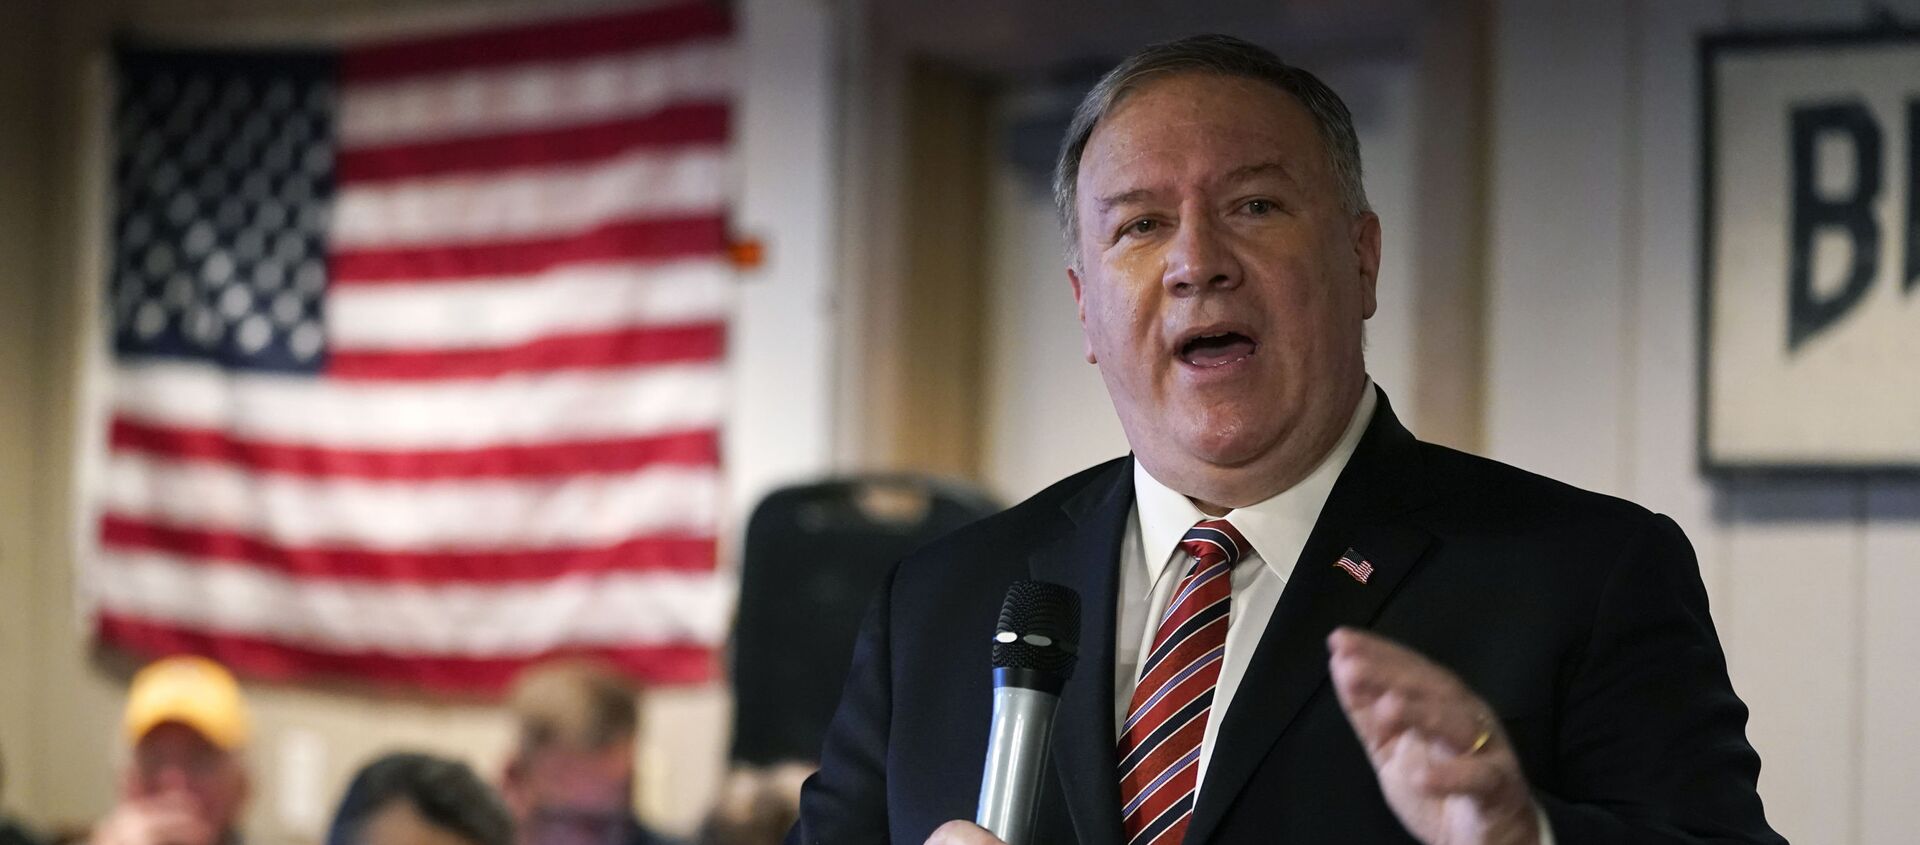 Former Secretary of State Mike Pompeo speaks at the West Side Conservative Club, Friday, 26 March 2021, in Urbandale, Iowa - Sputnik International, 1920, 11.07.2021